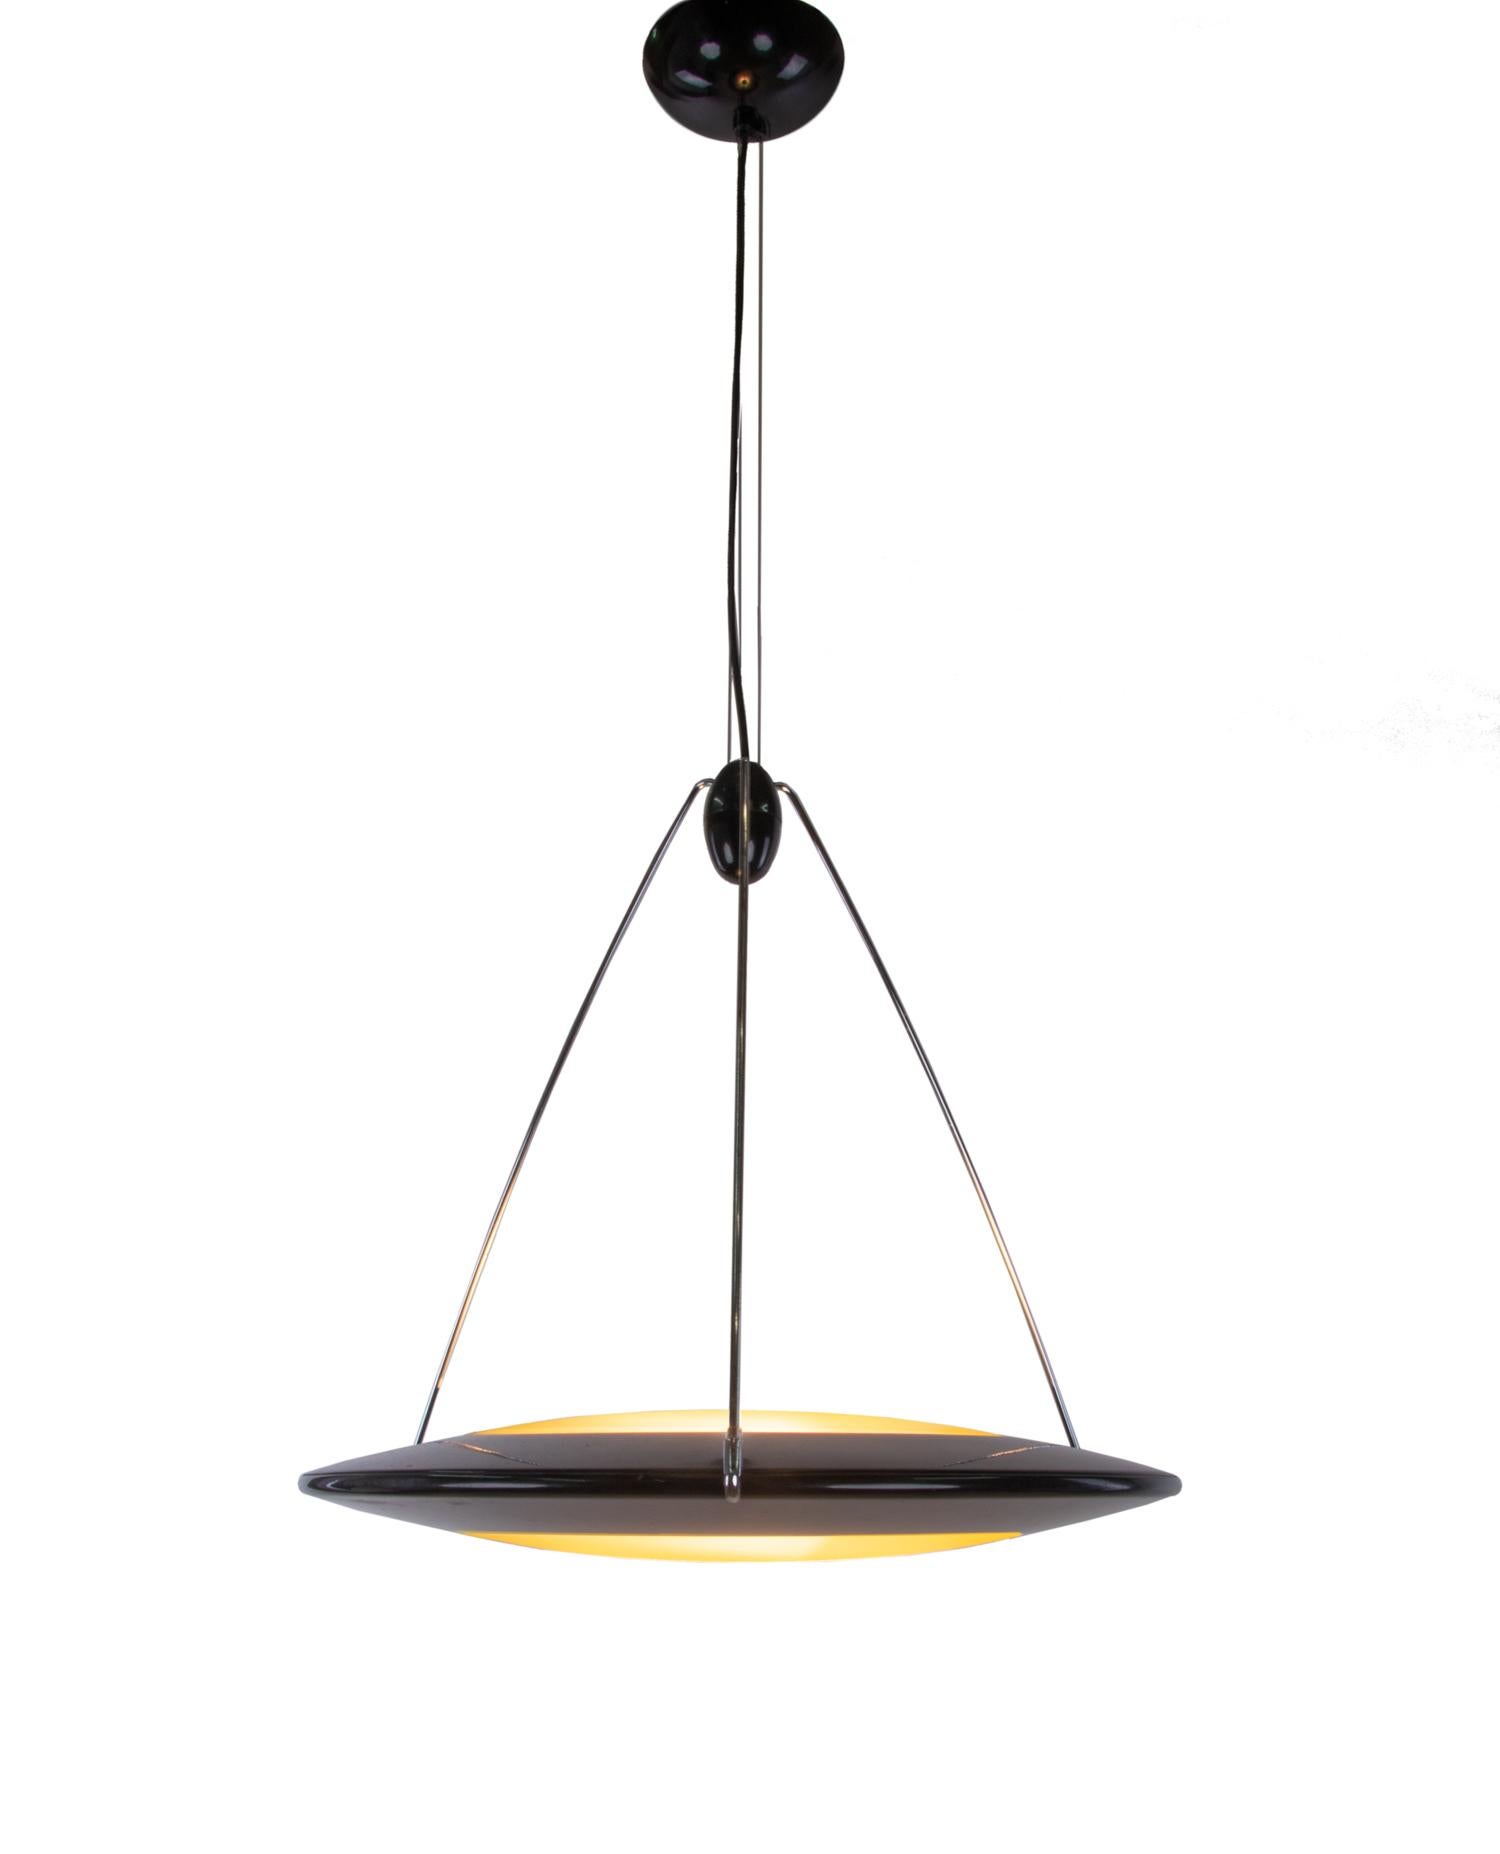 Postmodern UFO or flying saucer pendant light giving diffused upward and downward light.
Designed in the 1990s by Ezio Didone and manufactured by Arteluce (in those years division of FLOS.), Milano, Italy. 
A real eye-catcher even unlit. Gem from